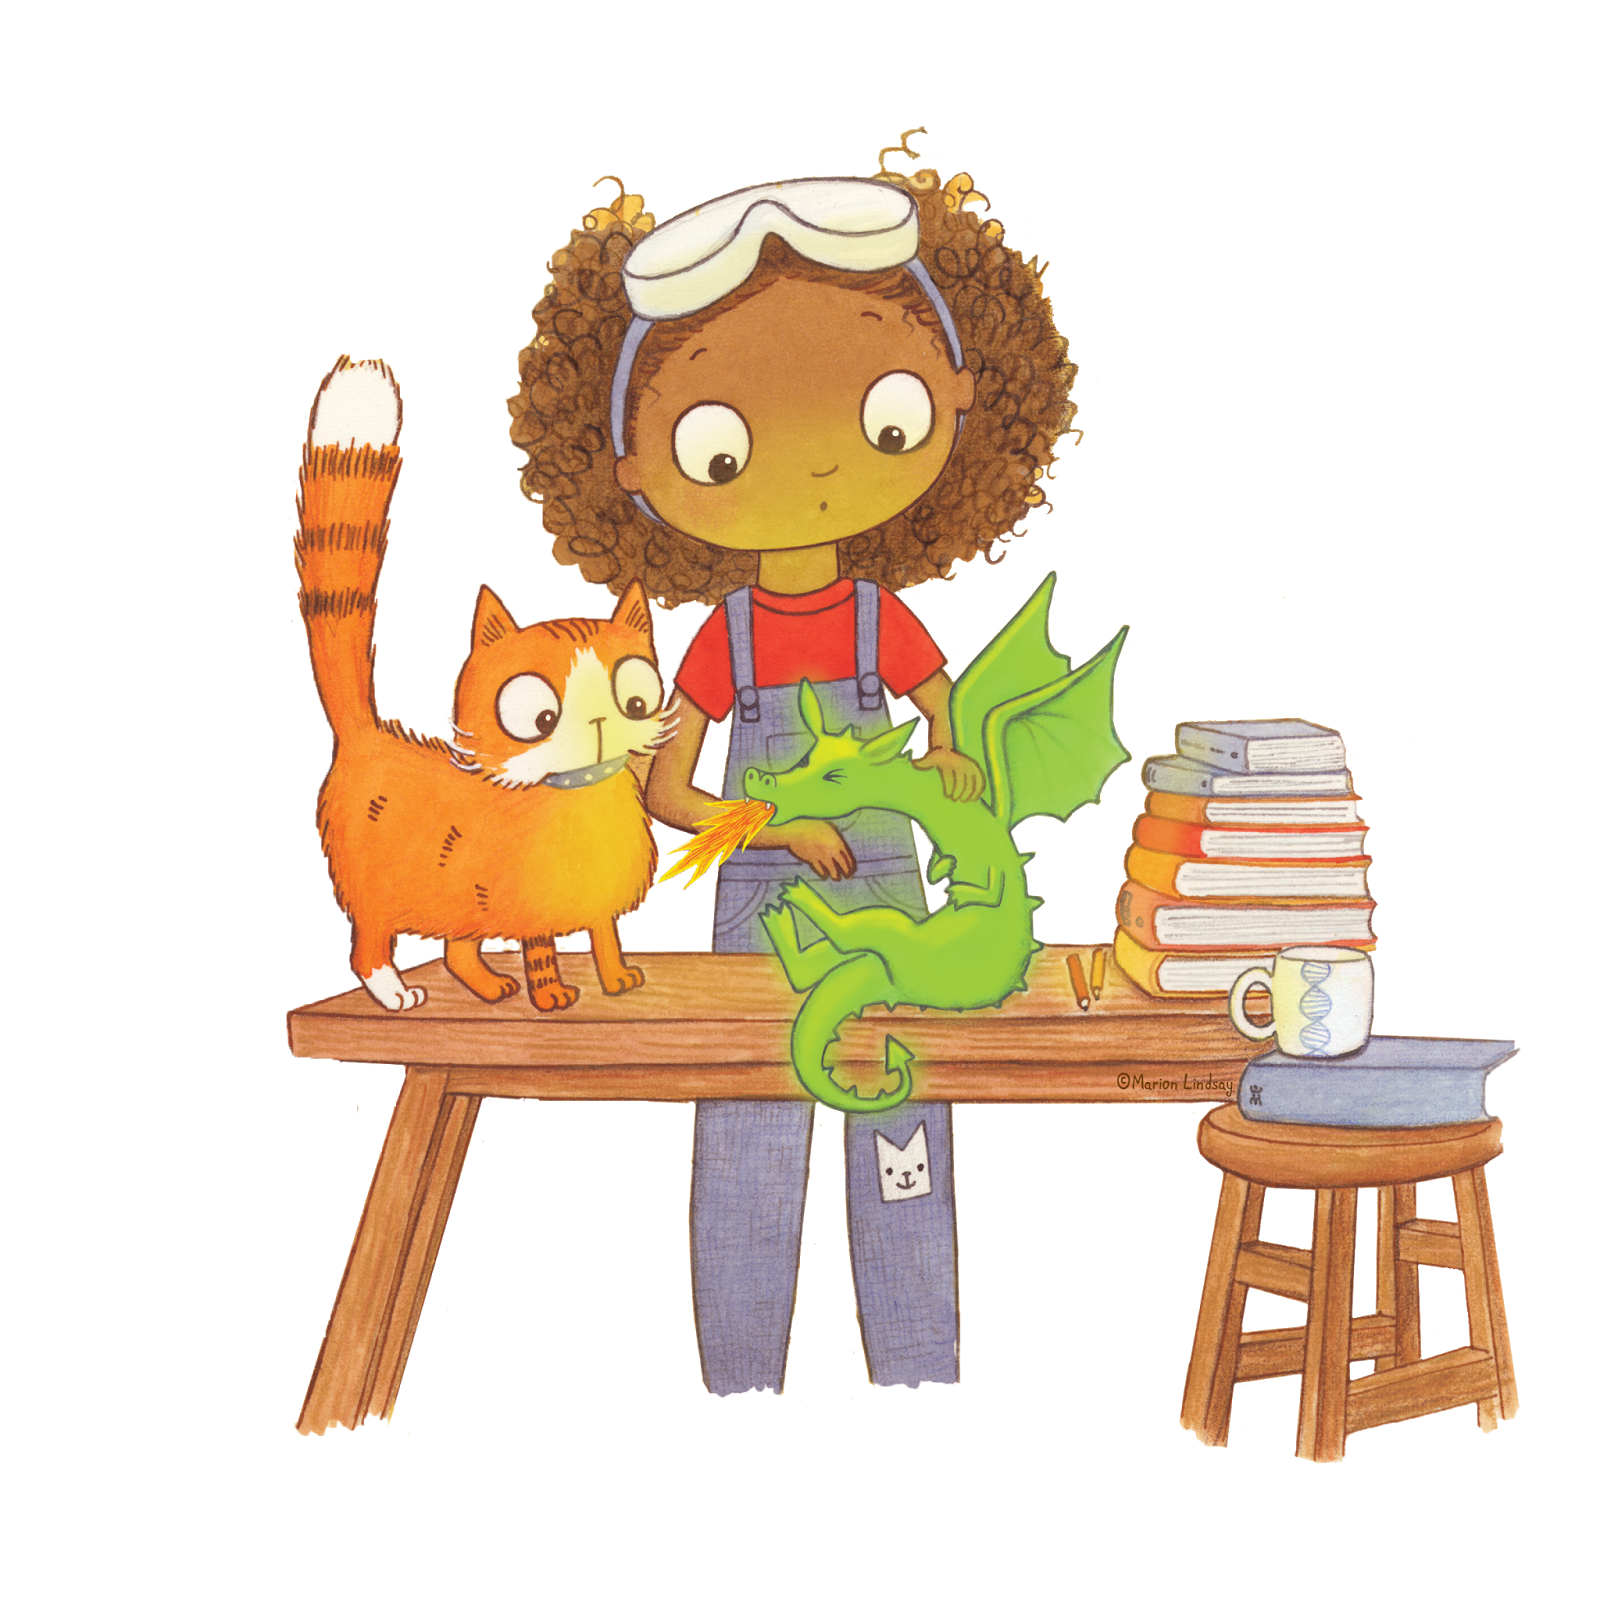 clipart table science